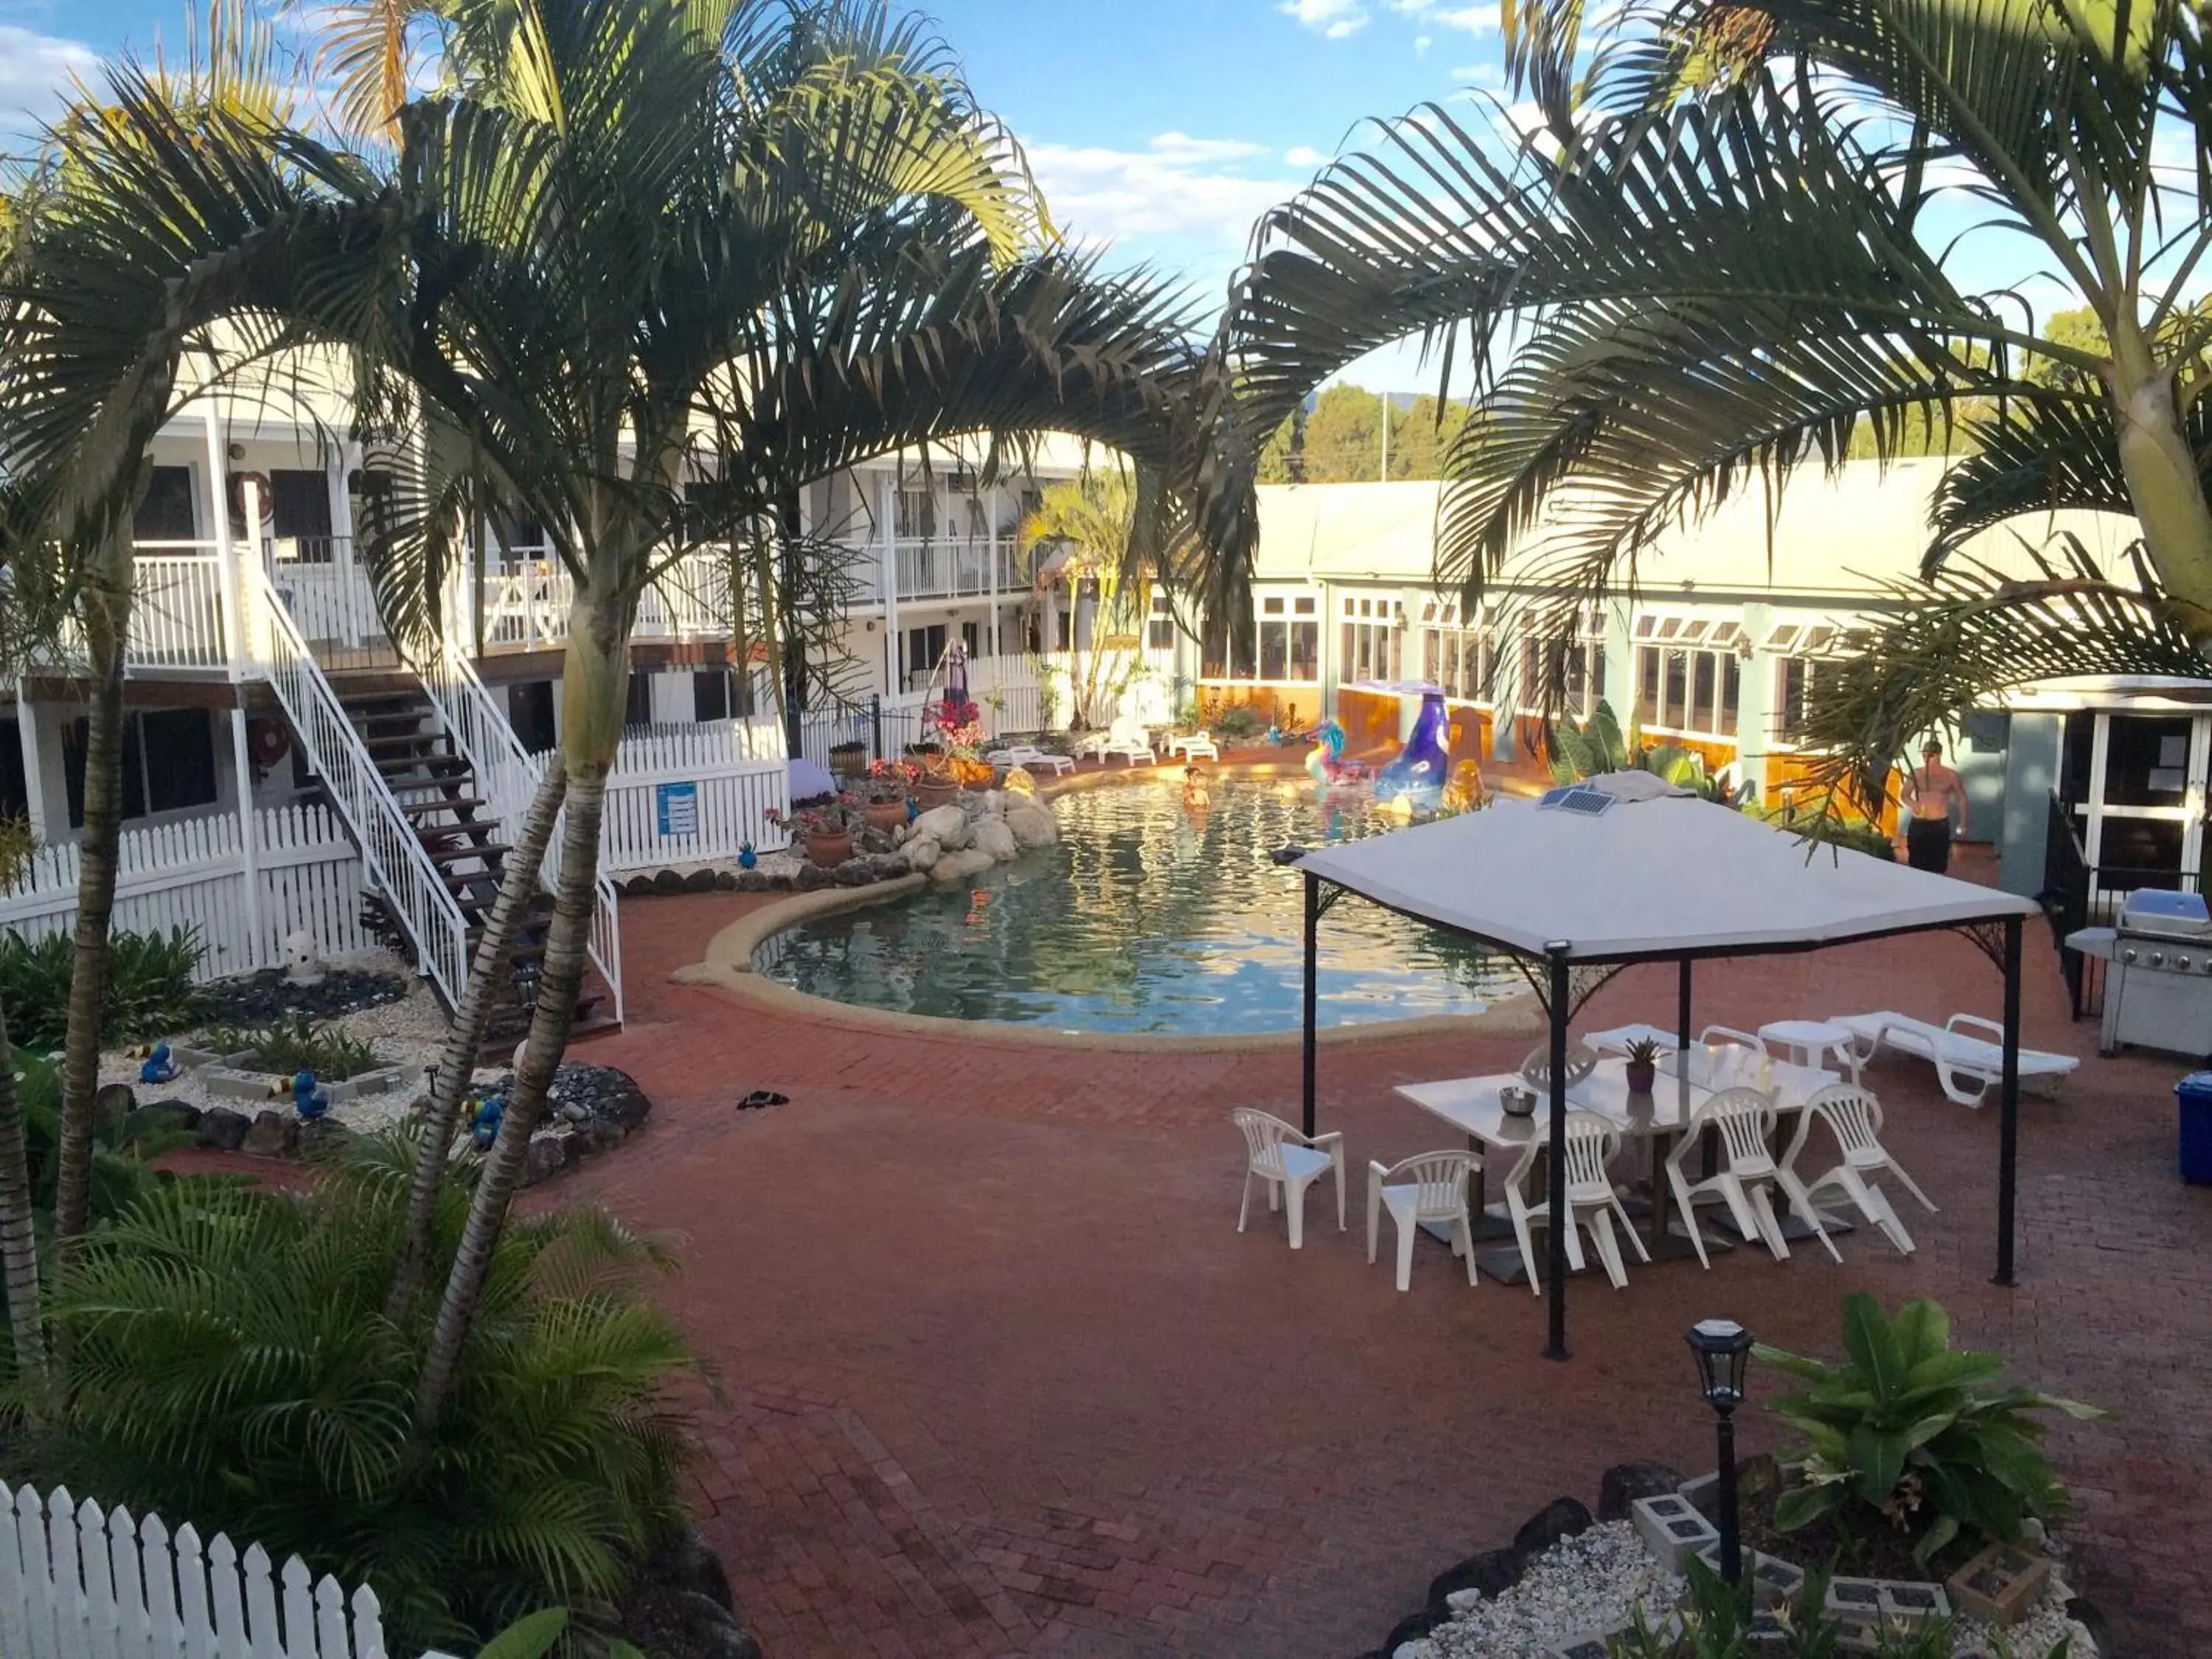 Swimming pool in South Cairns Resort